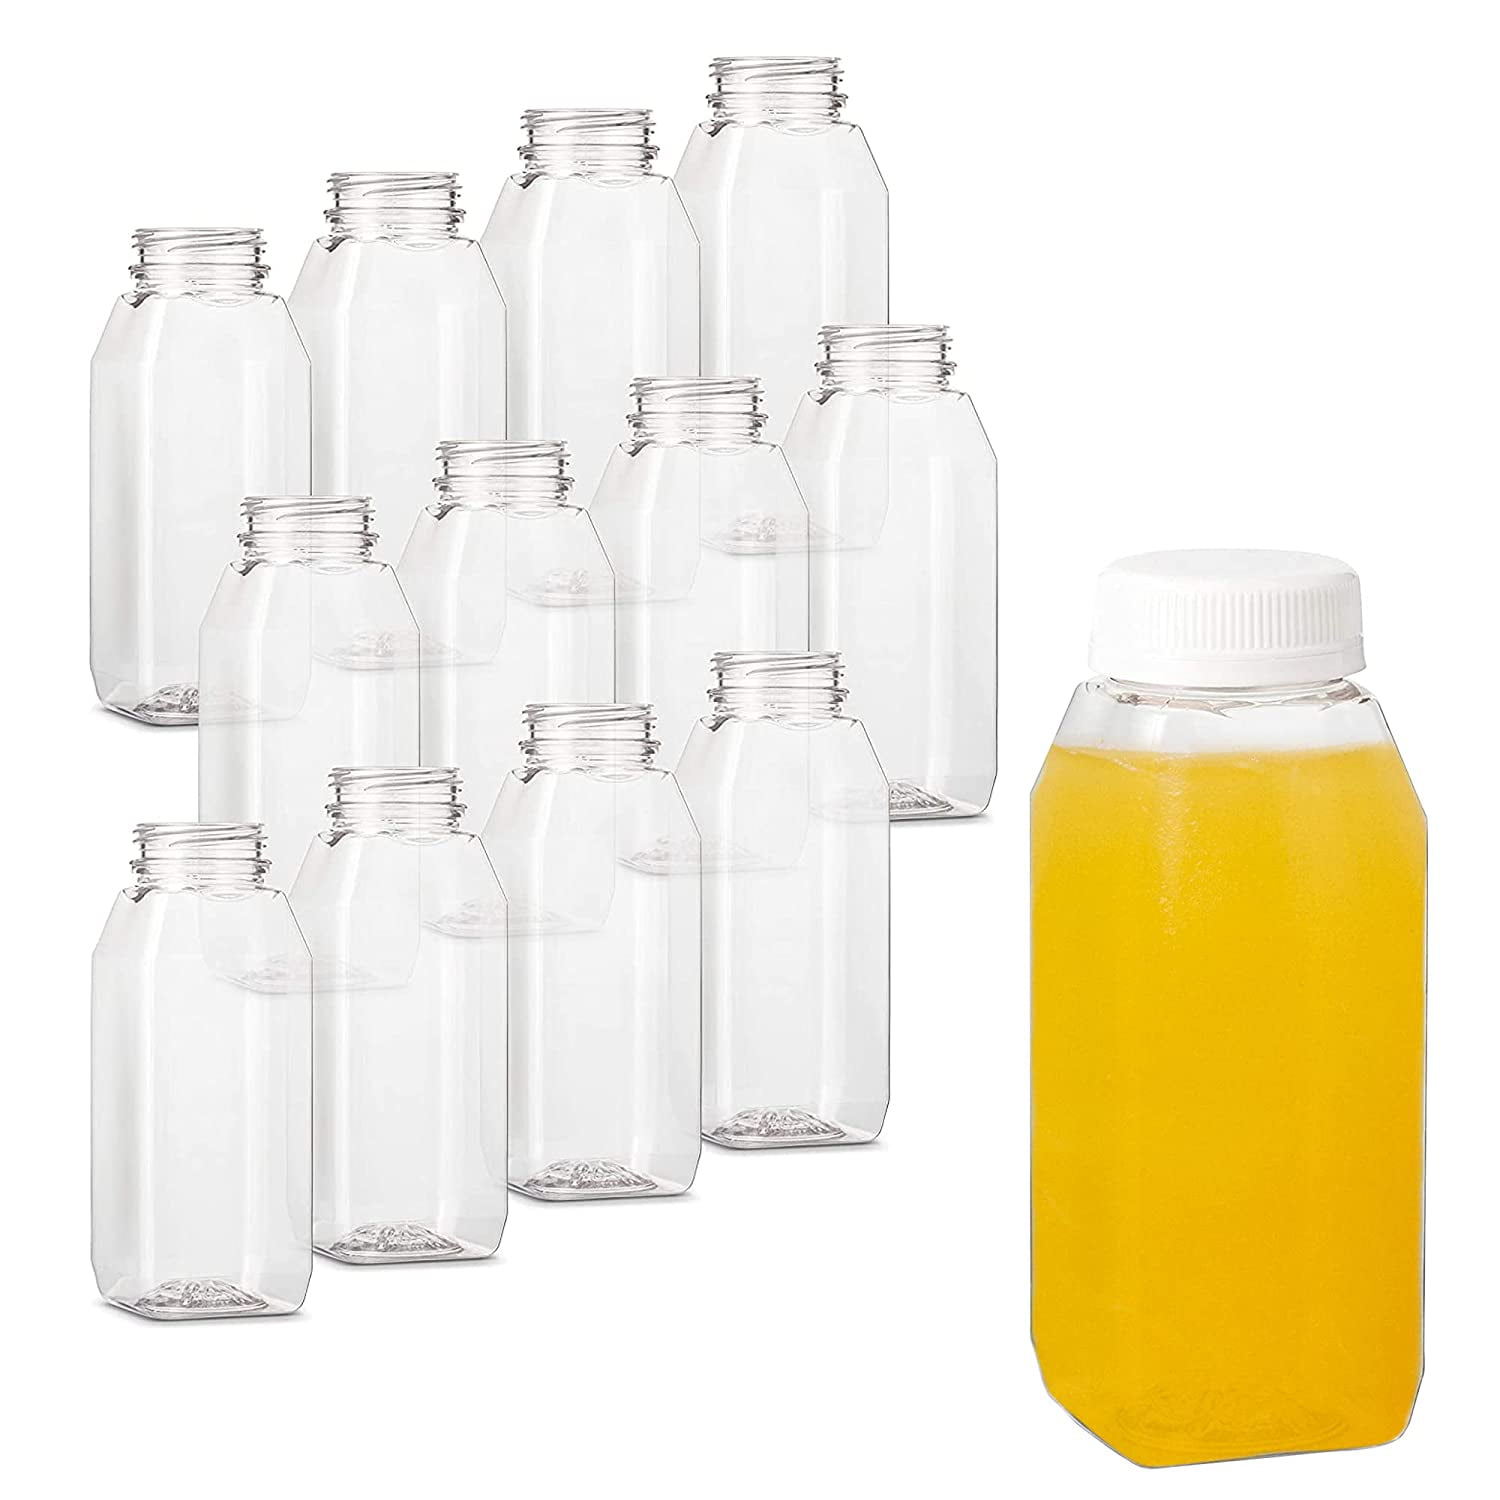 Restaurantware French Countryside 12 Ounce Juice Bottles, 10 Square Juicing Bottles - with Tamper-Evident Caps, Reusable, Clear Glass Juicing